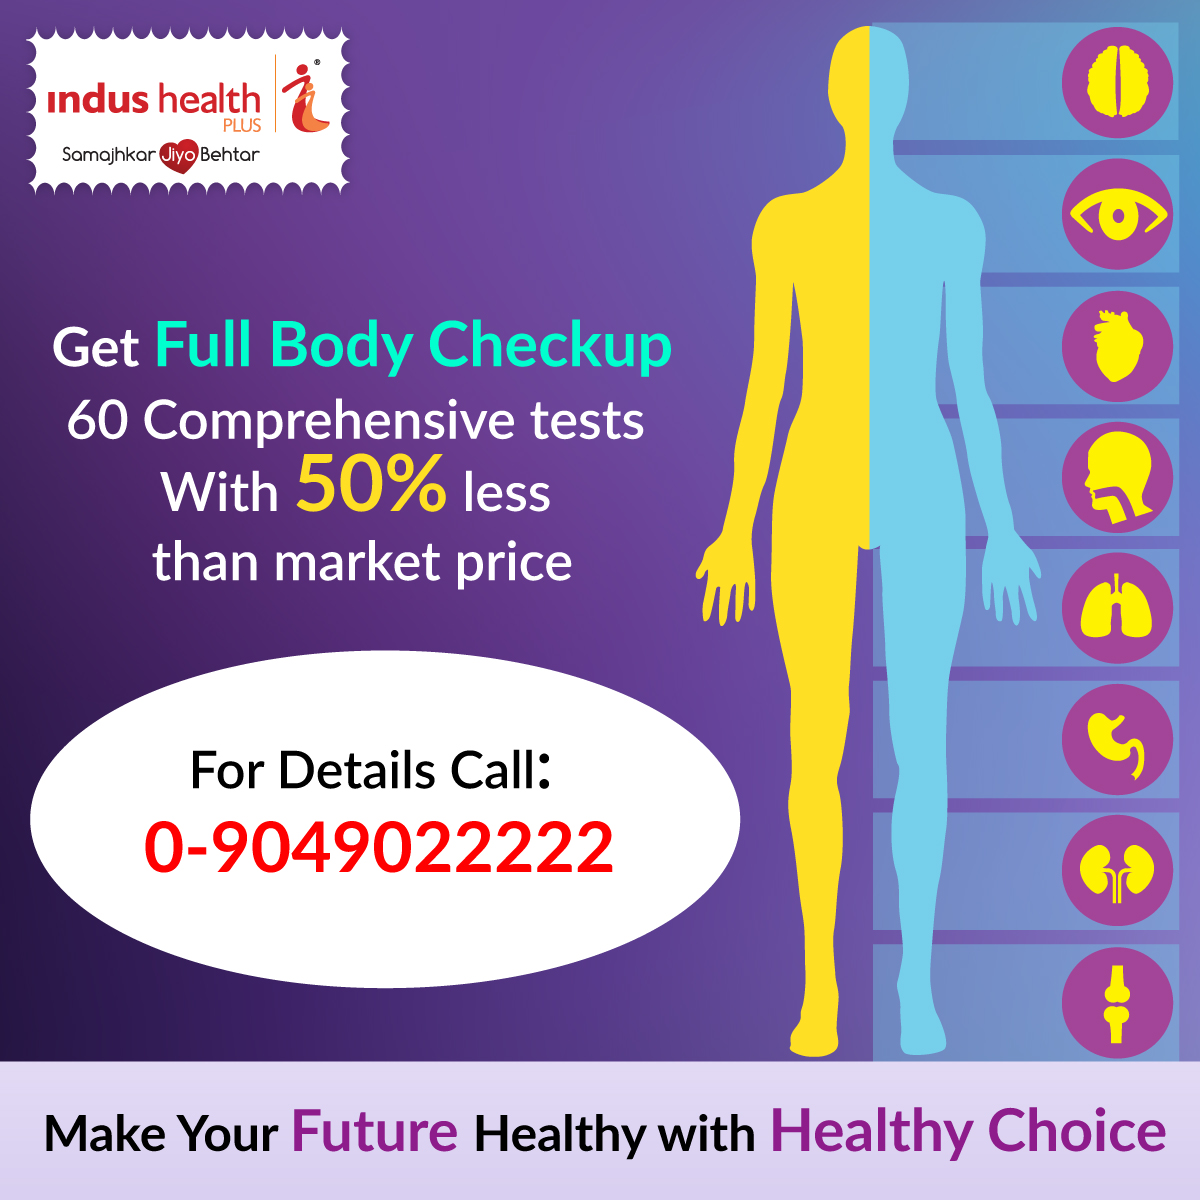 Book Full Body Checkup and Get up to 50% Off  Today!!Health and BeautyHealth Care ProductsNoidaNoida Sector 10